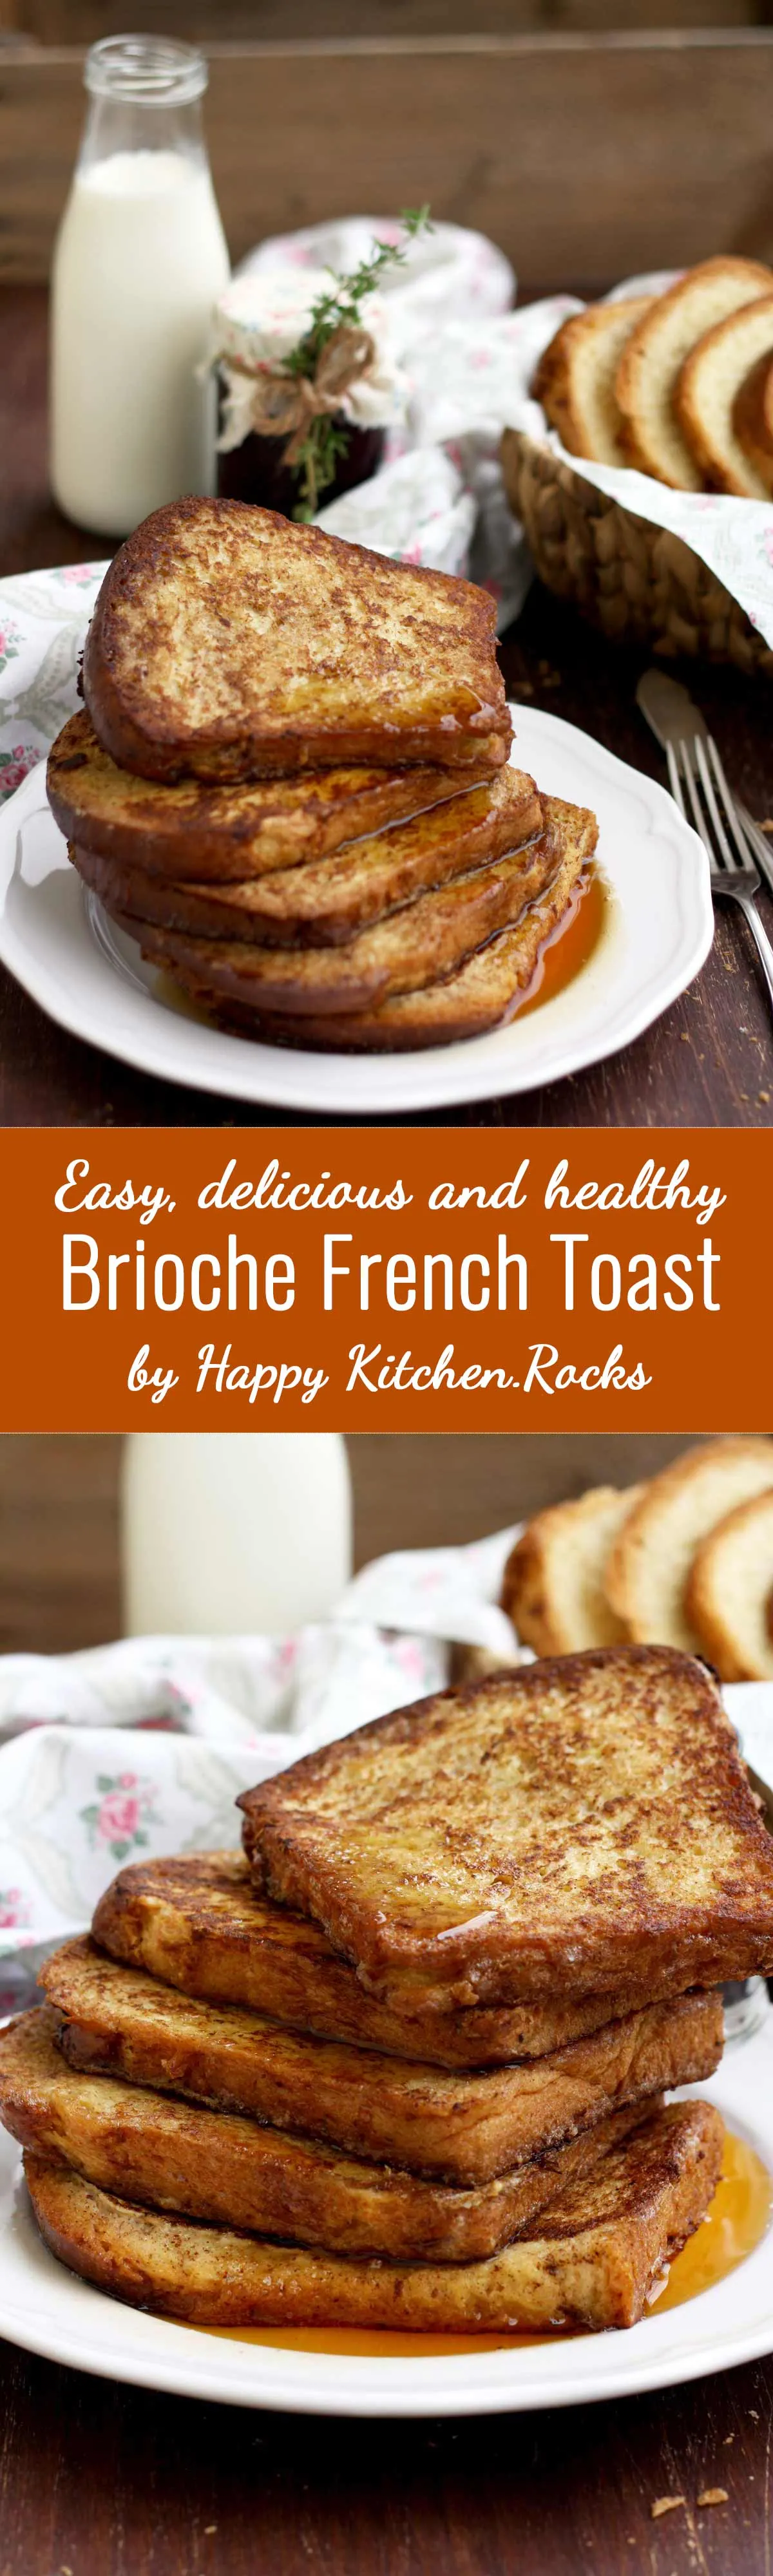 Healthier Brioche French Toast Super Long Collage with Text Overlay